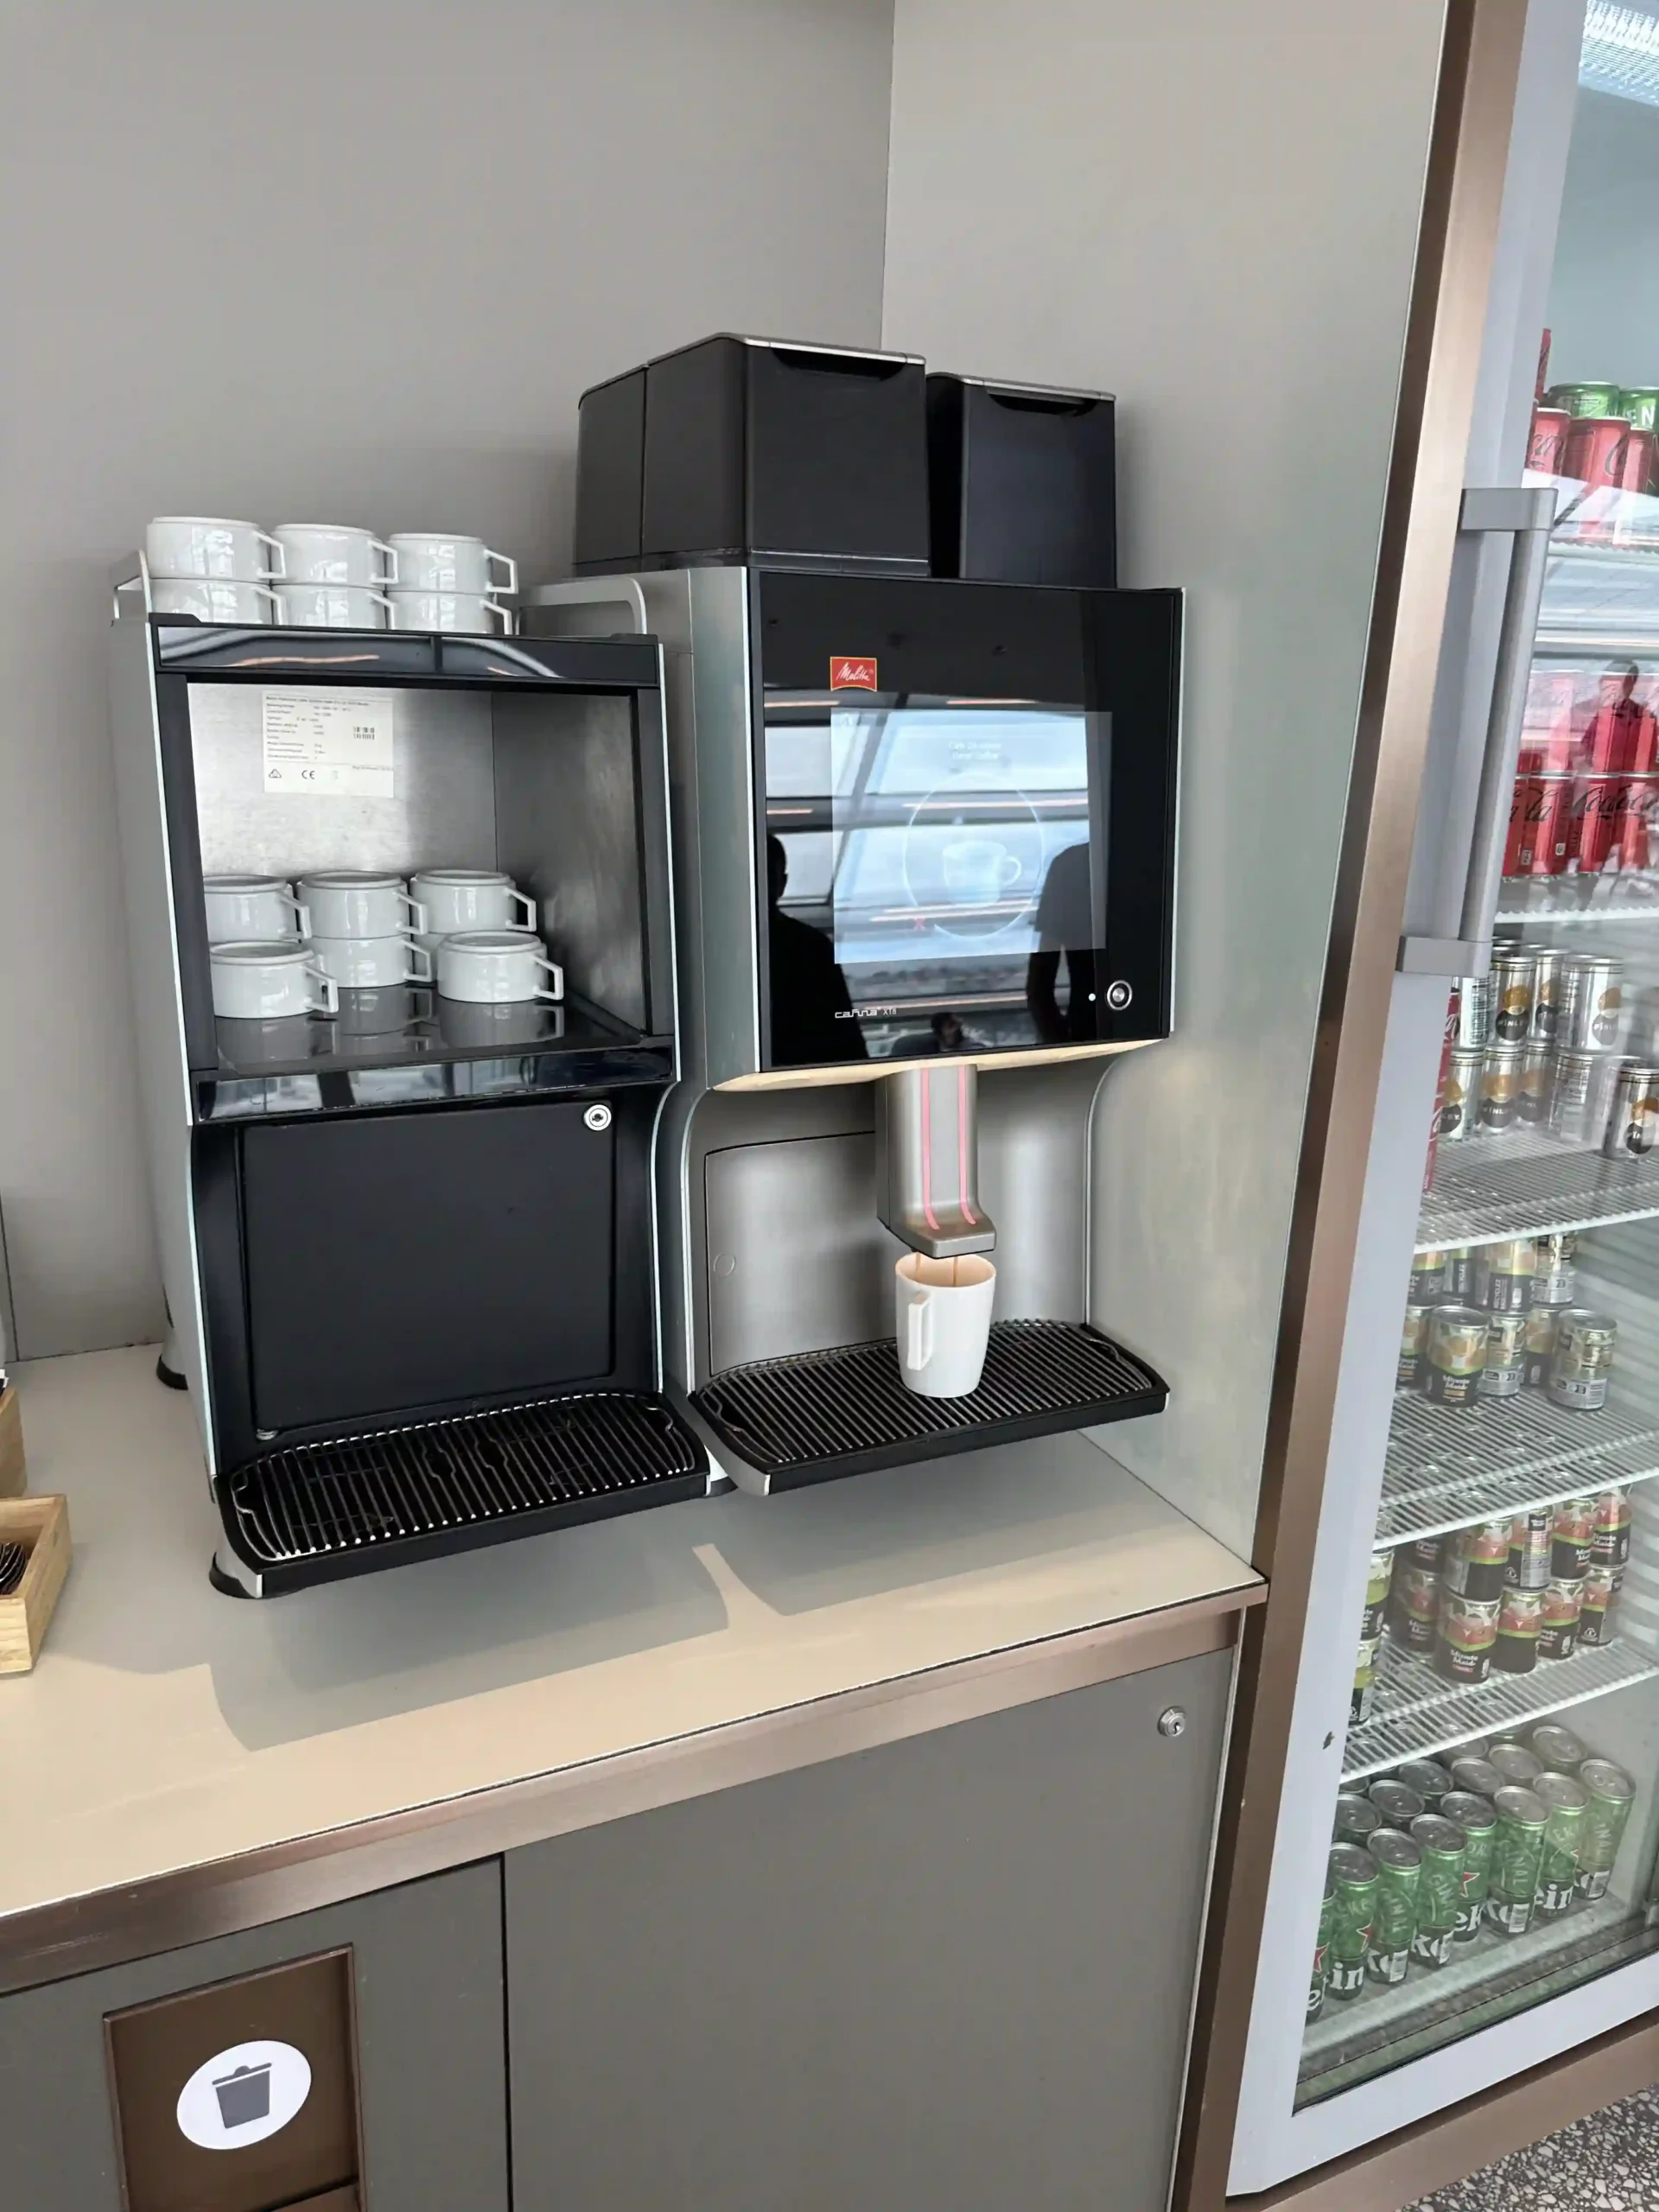 a coffee machine with cups on the shelf